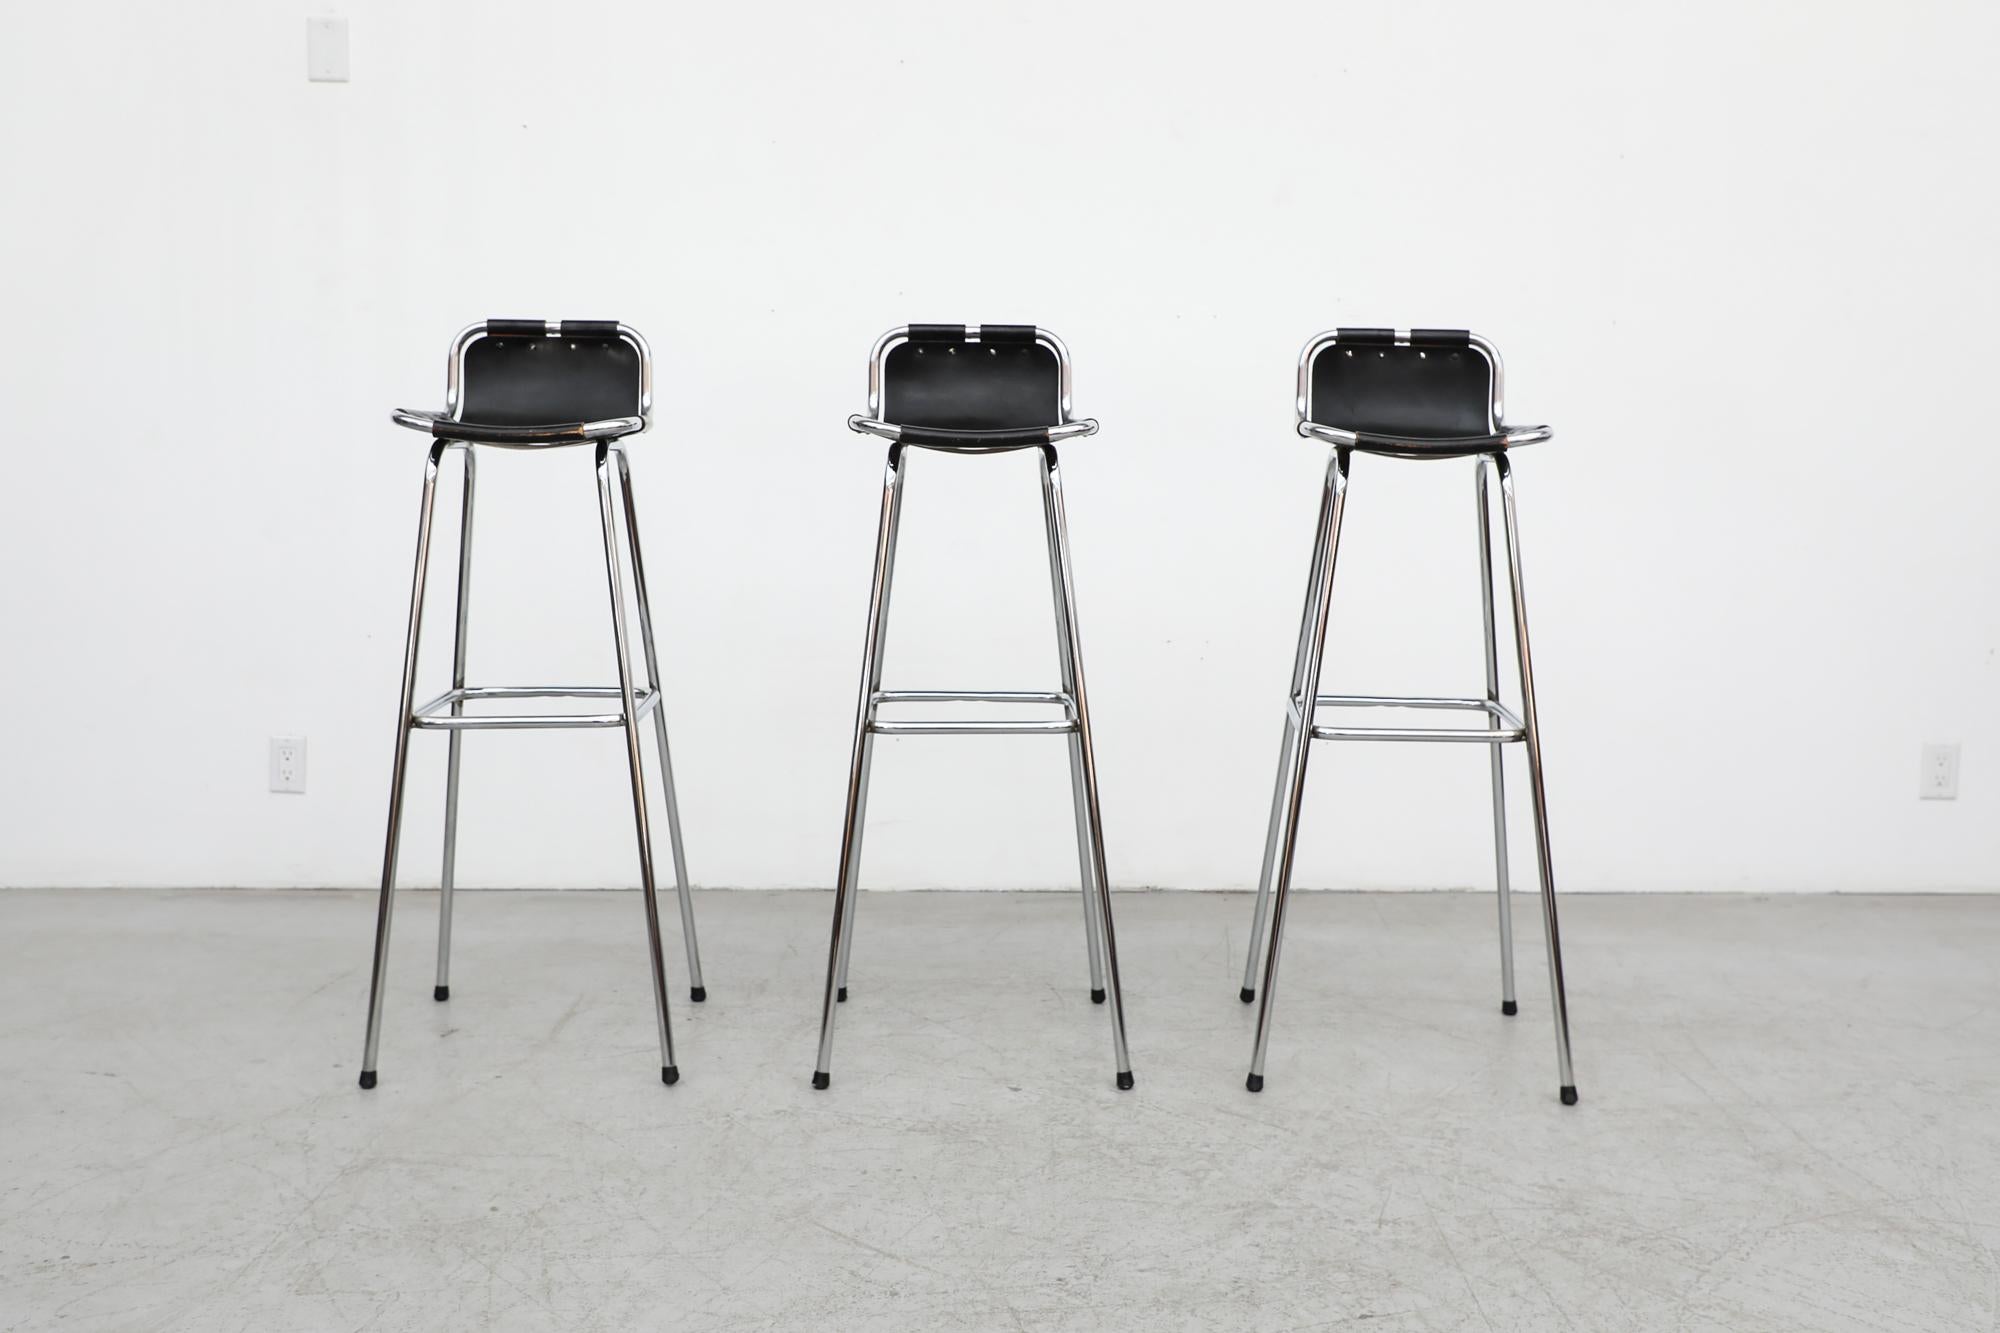 Set of 3 high bar stools in the style of the Charlotte Perriand Les Arcs stools. These stools have a 37